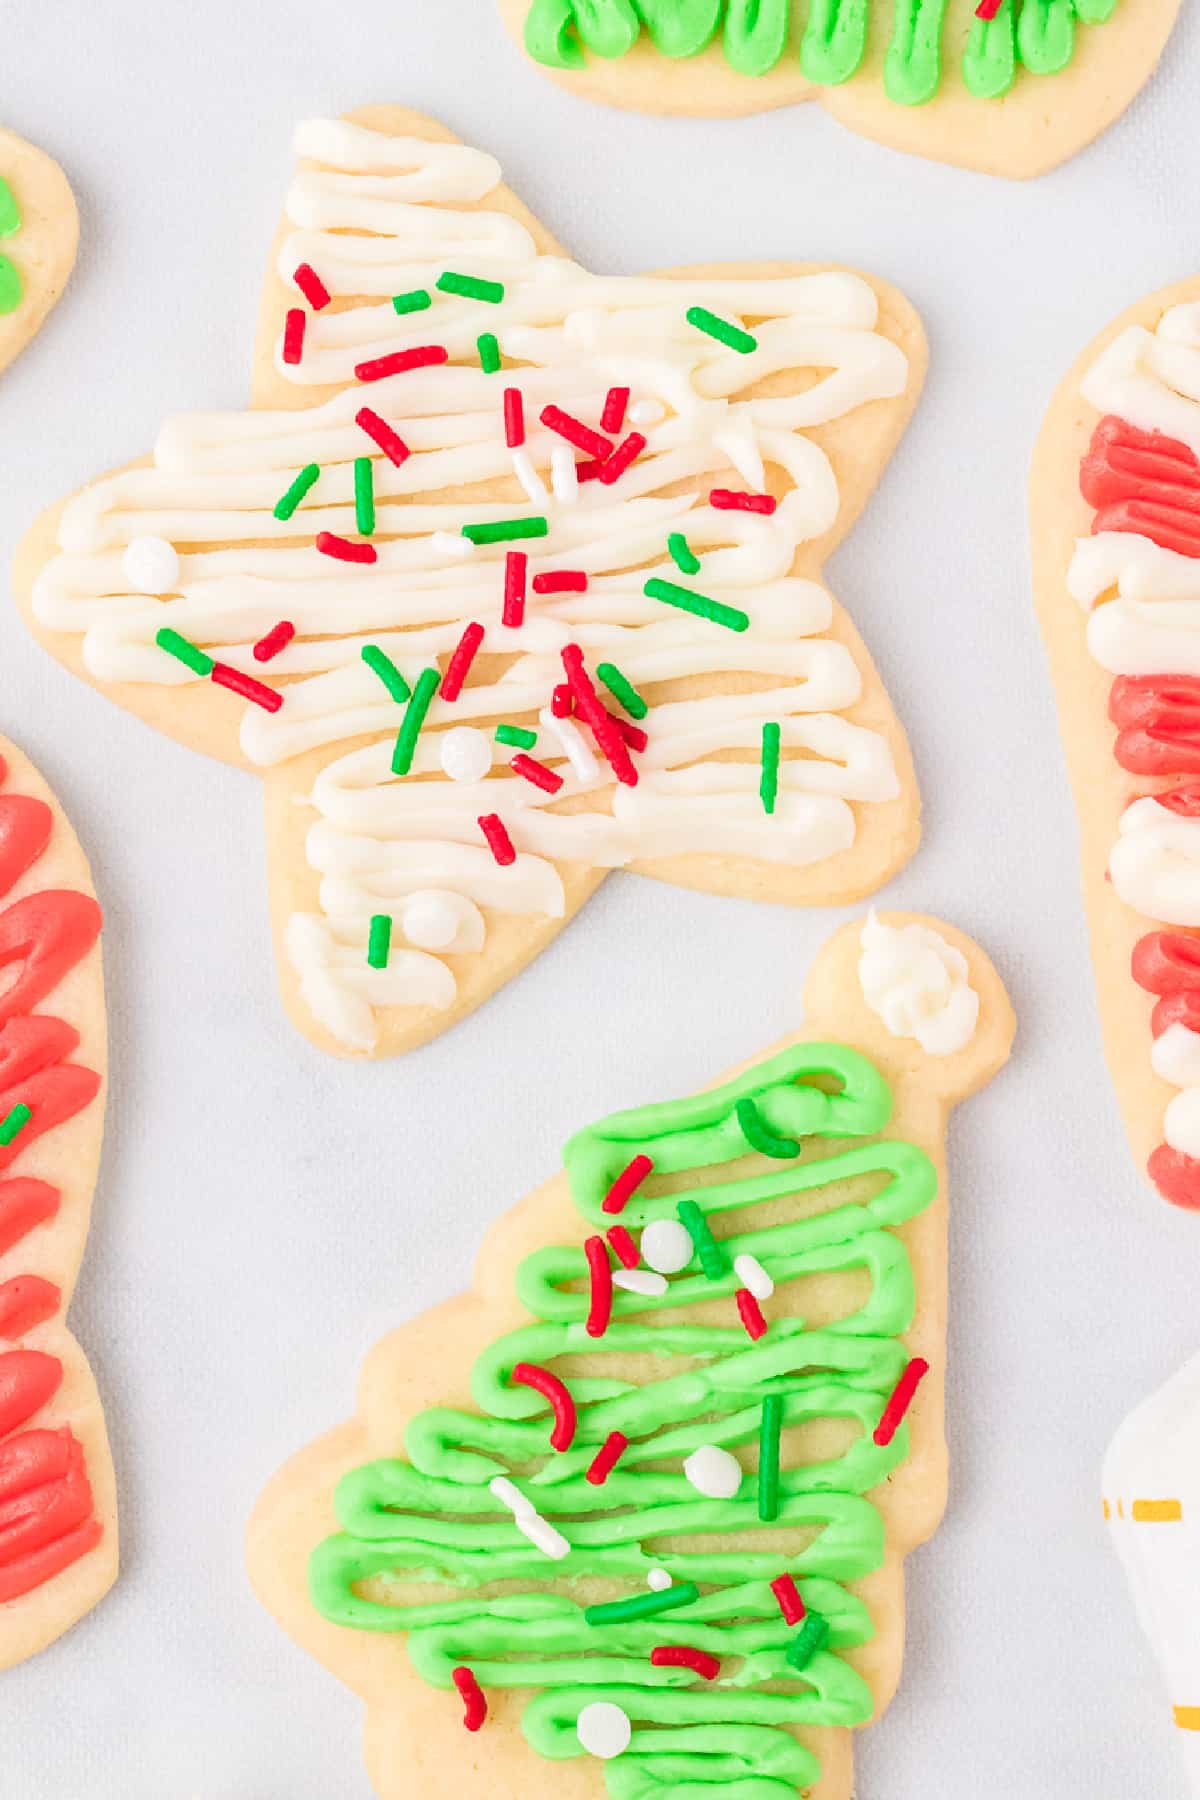 Frosted cutout cookies shaped like a star and a tree frosted with Christmas colored sprinkles.